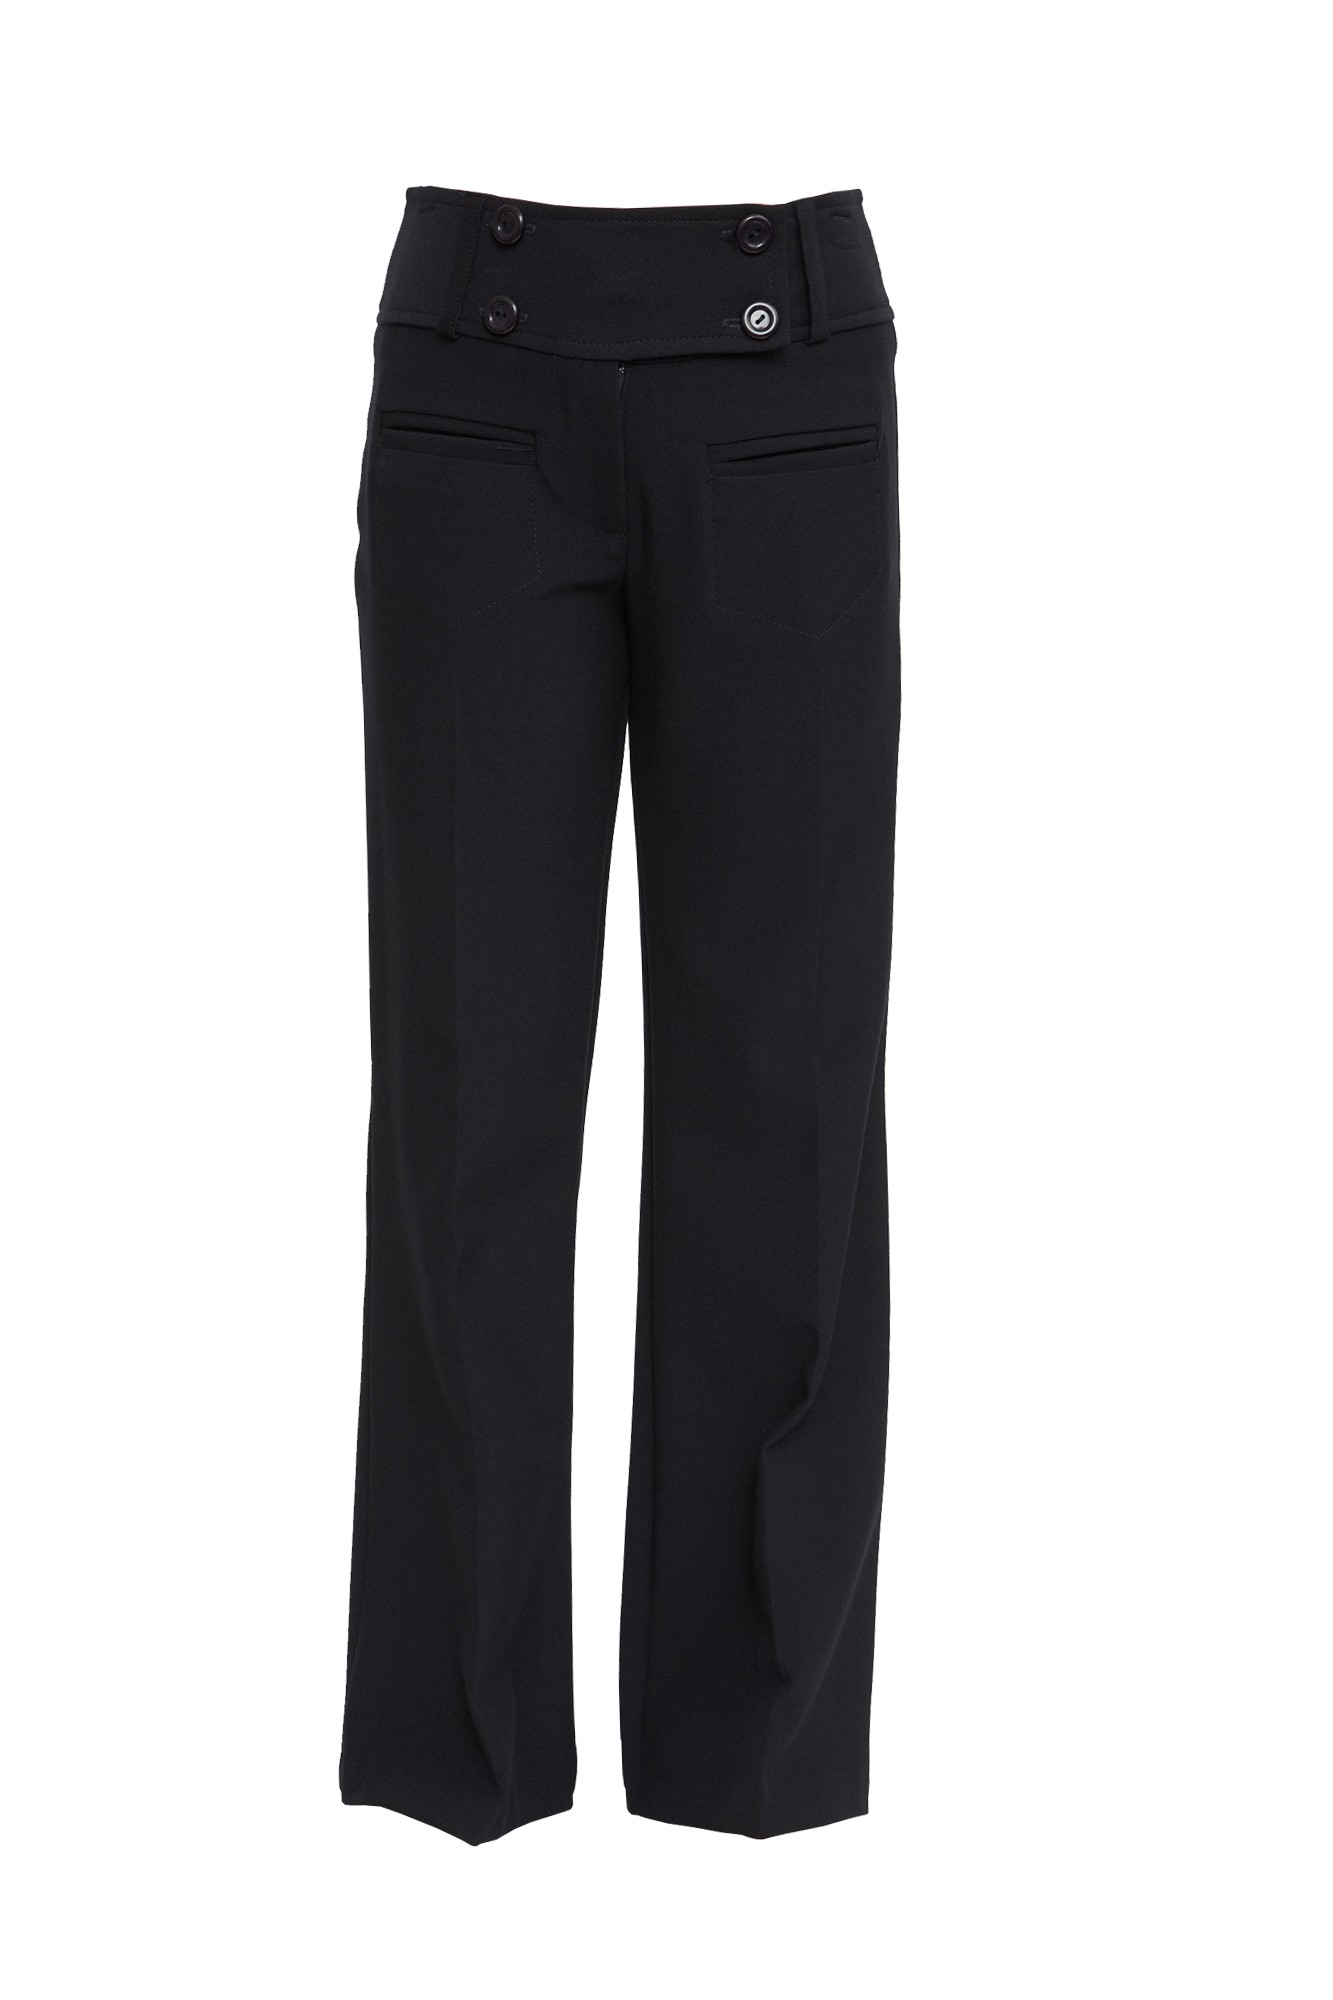 Black Front Jetted Pockets Senior Girls Trousers (7340-BLACK) - Arts ...